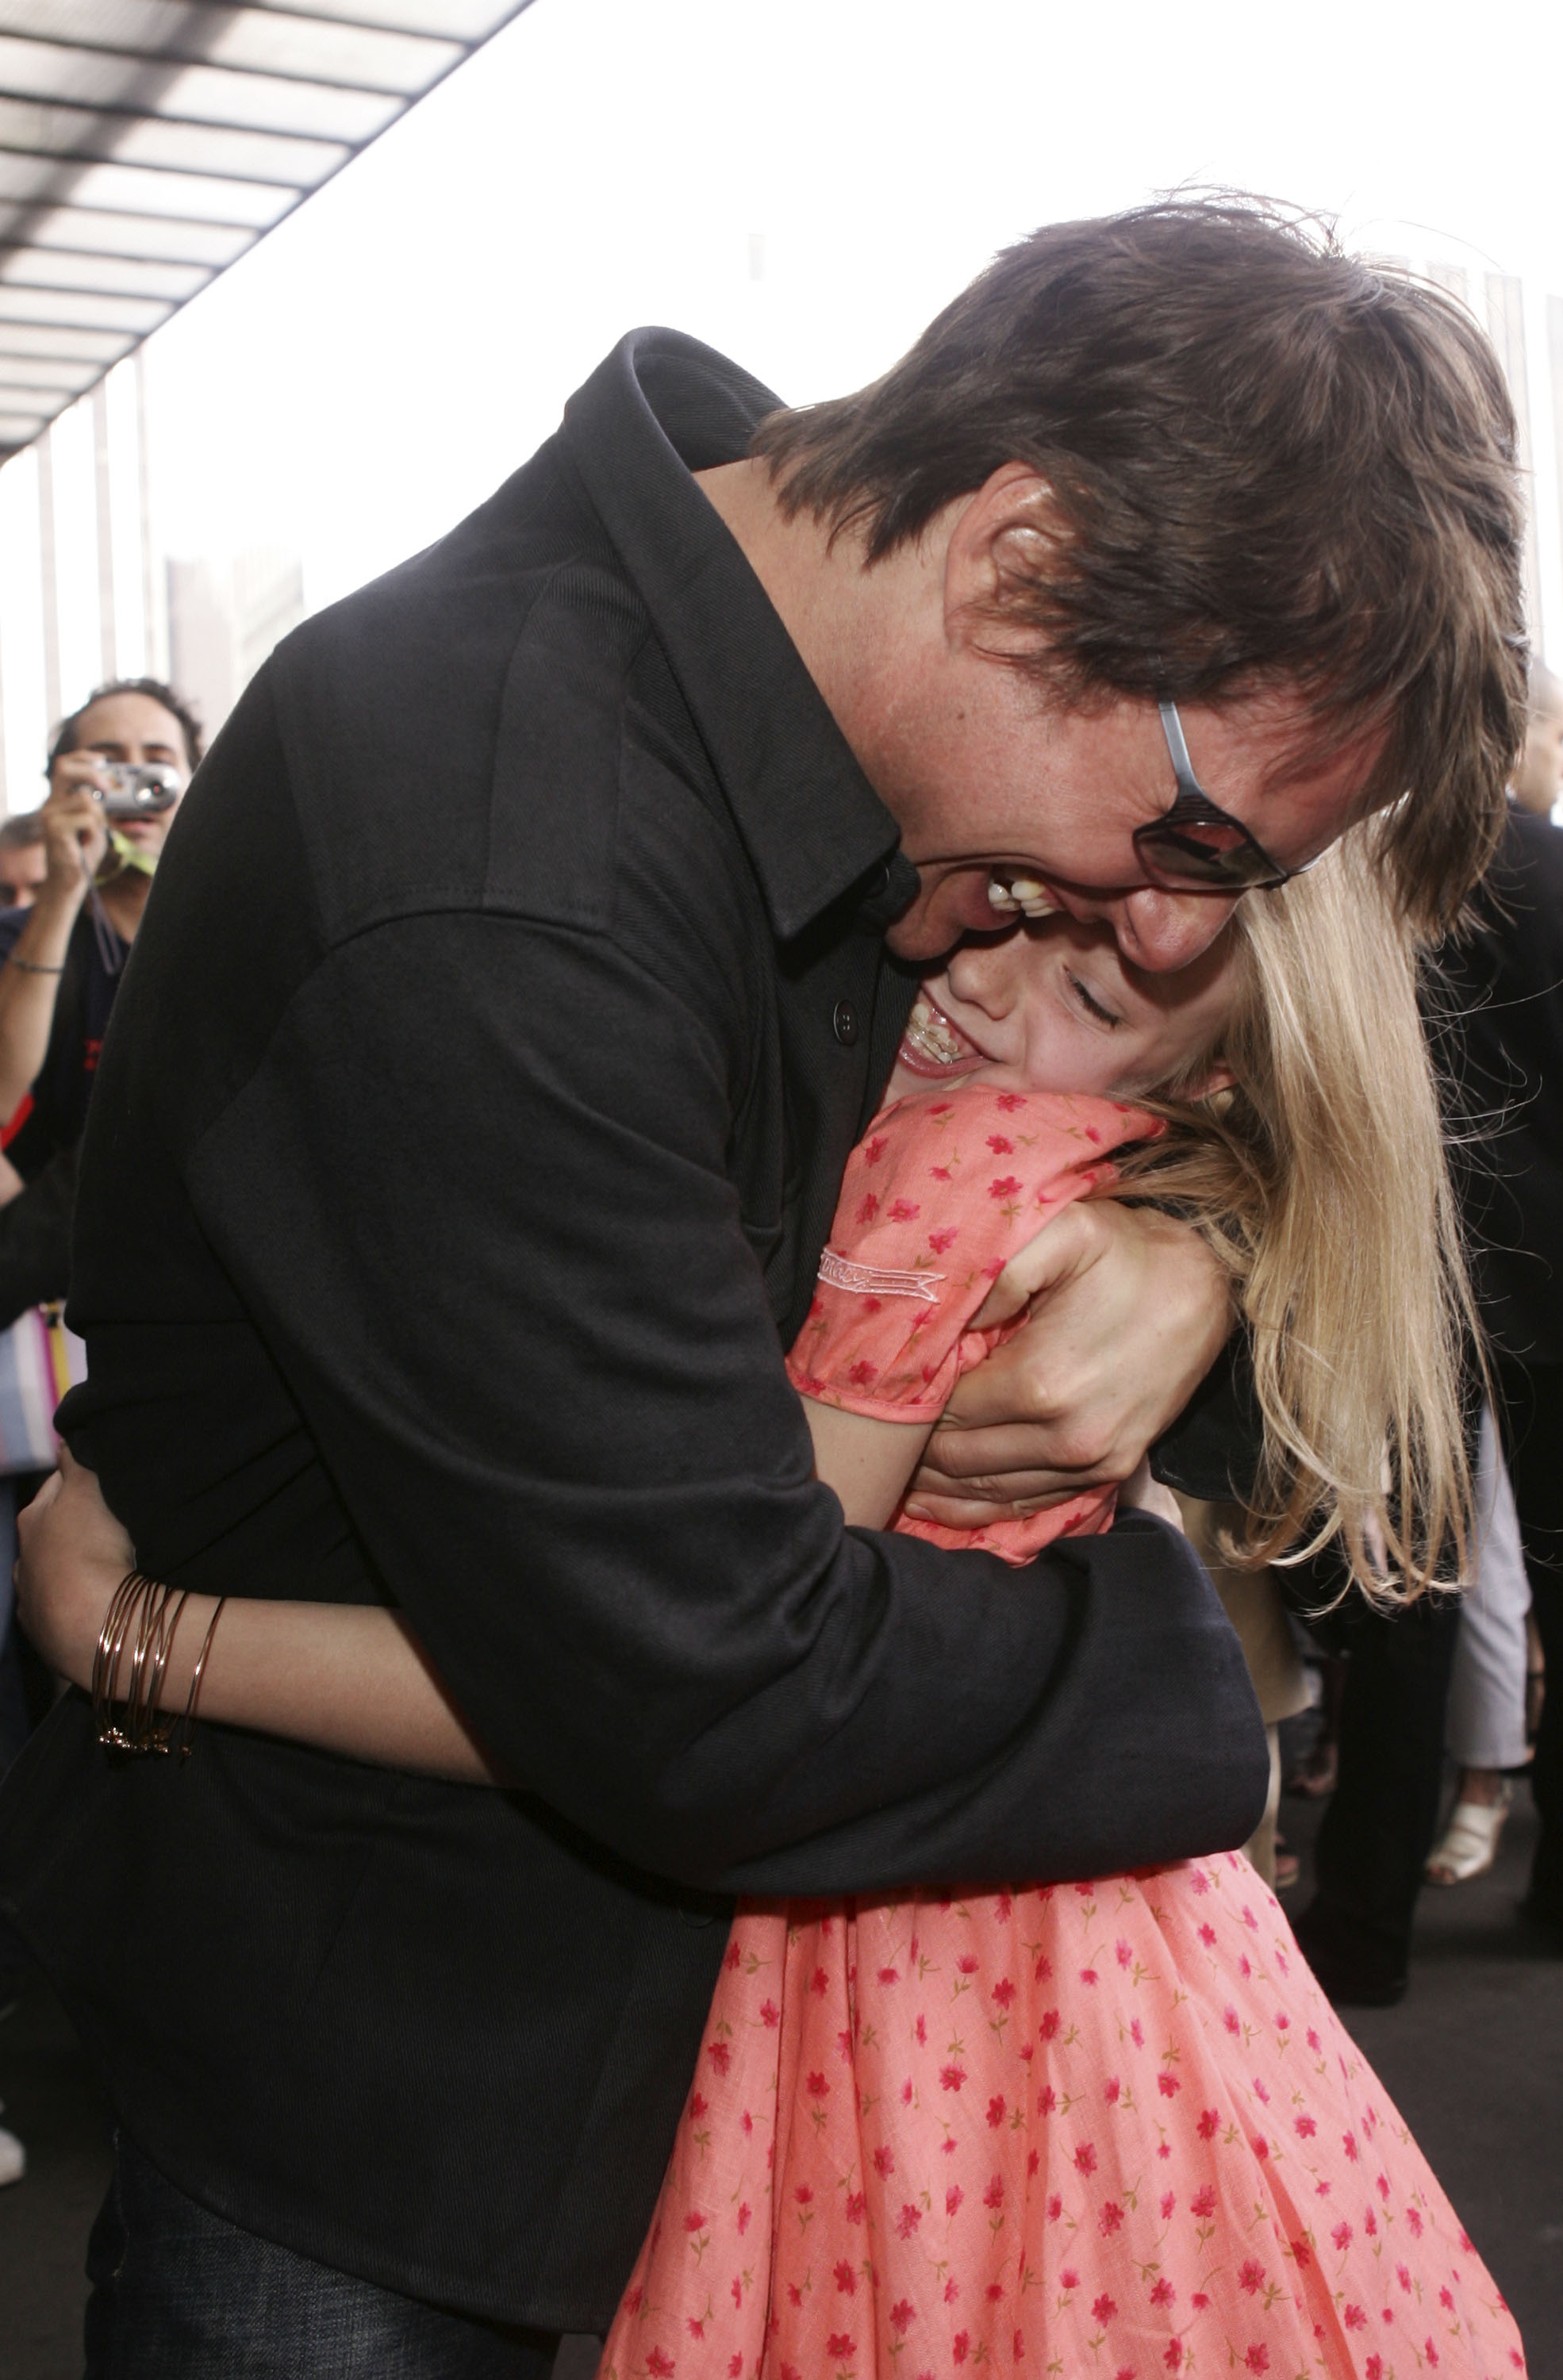 Tom Cruise and Dakota Fanning attend the French premiere of "War Of The Worlds" on June 17, 2005 in Marseille, France | Source: Getty Images